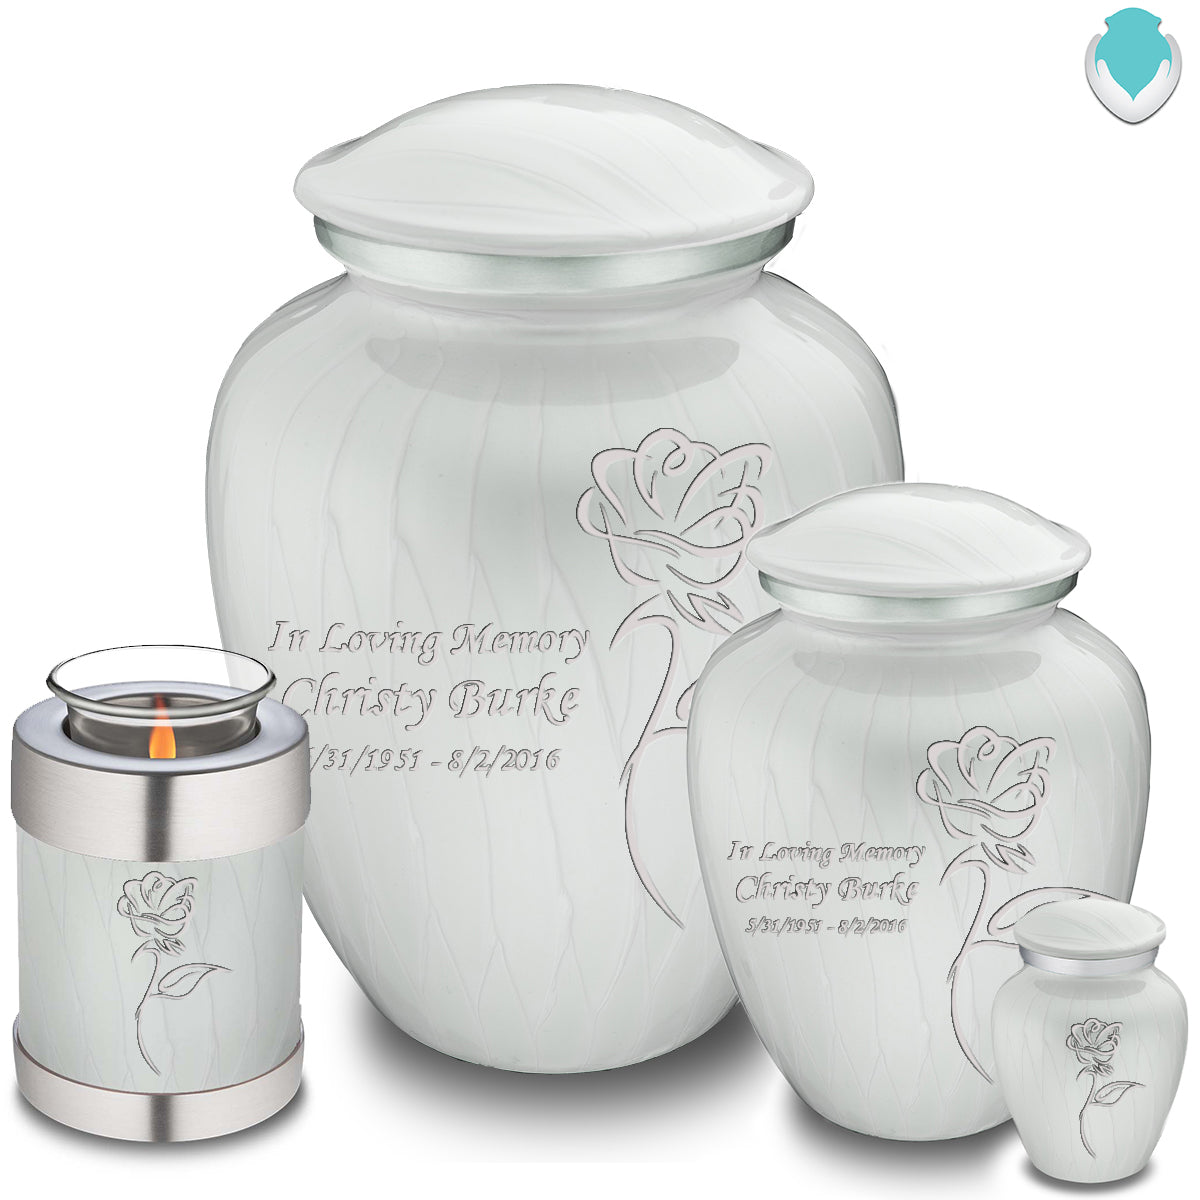 Adult Embrace Pearl White Rose Cremation Urn